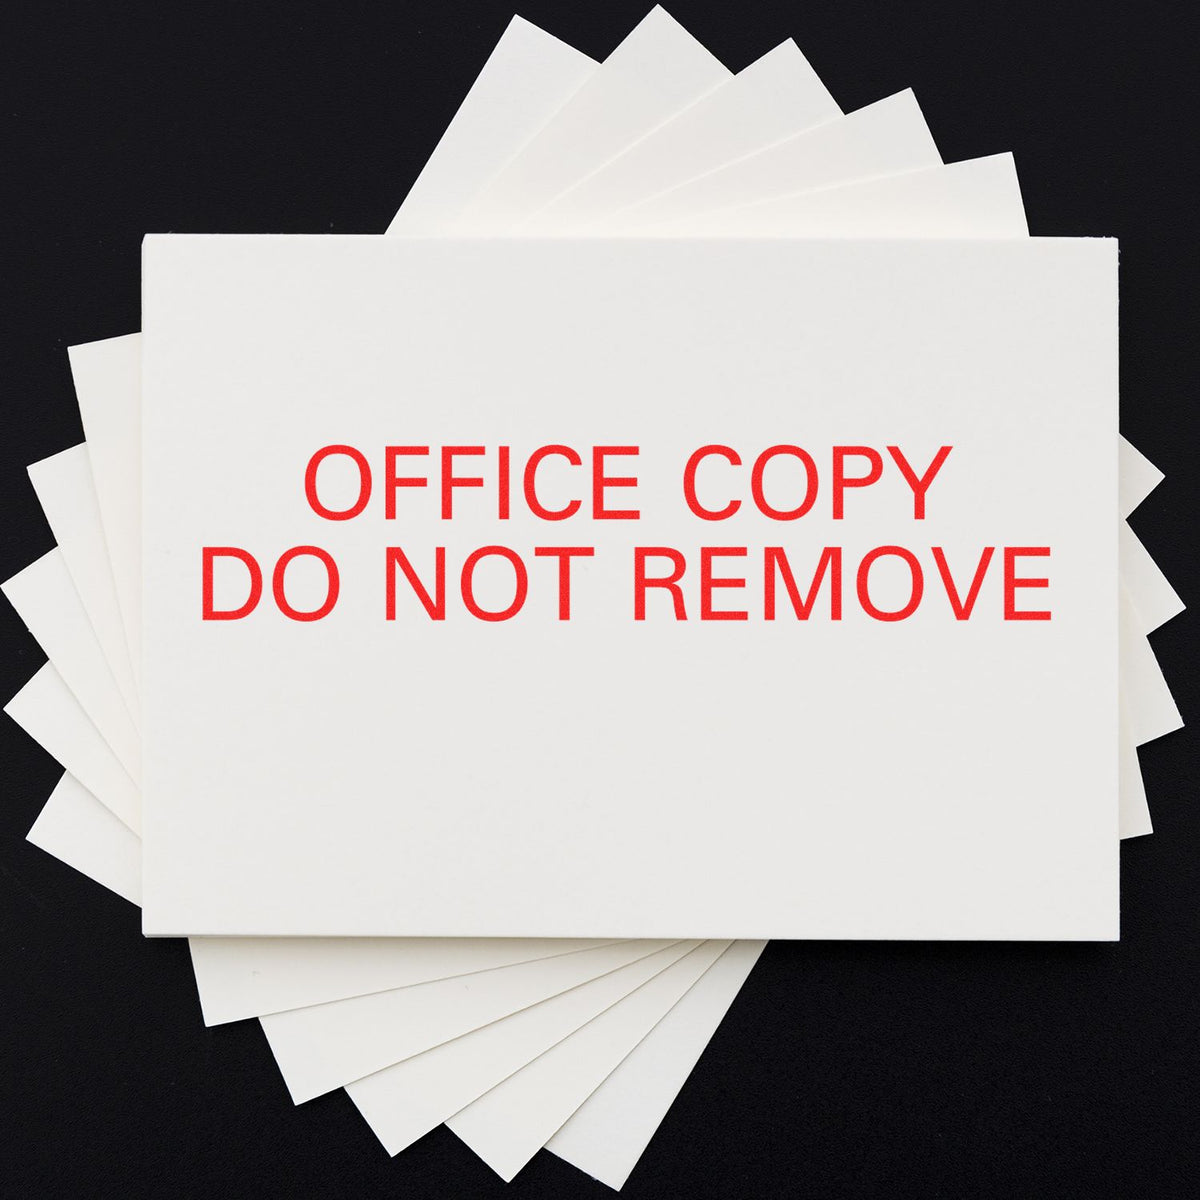 Large Self-Inking Office Copy Do Not Remove Stamp In Use Photo